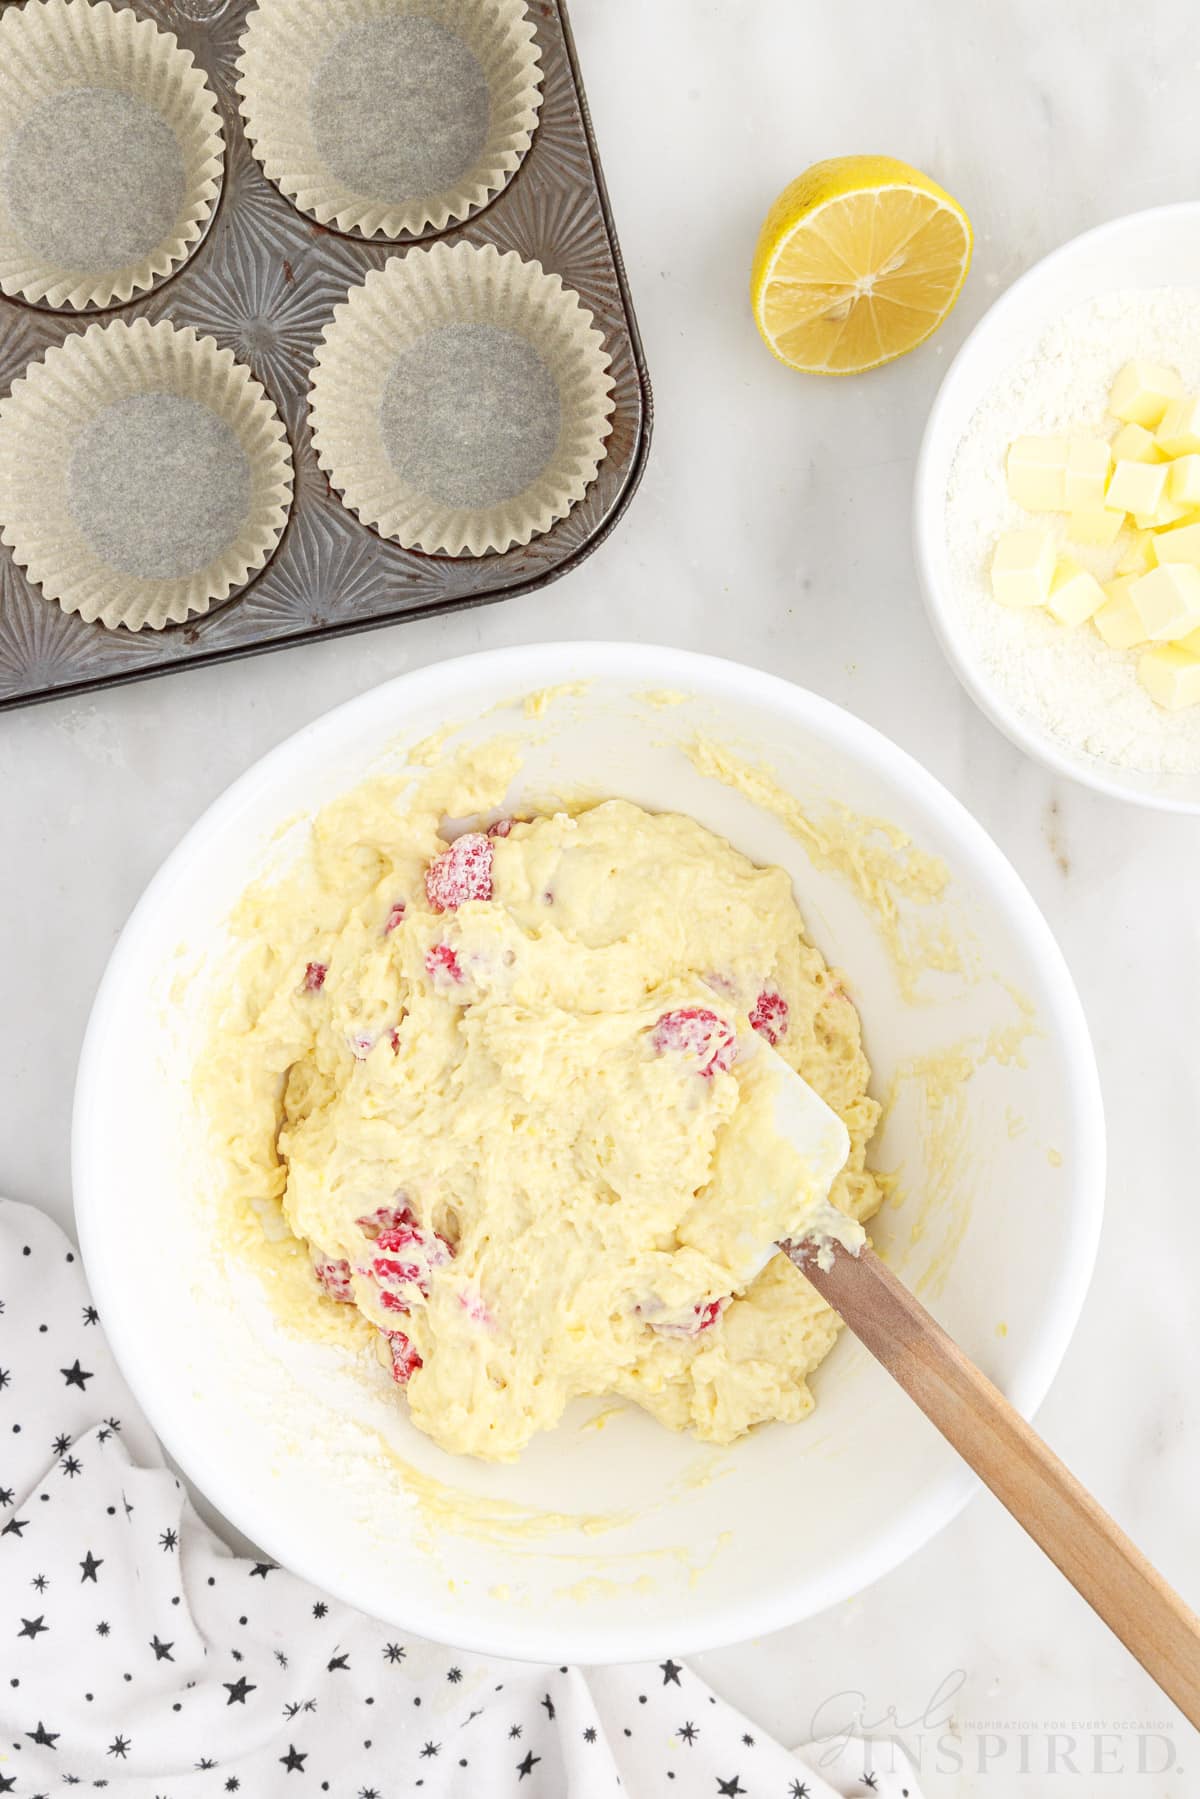 Raspberries stirred into the batter with a spatula inserted.